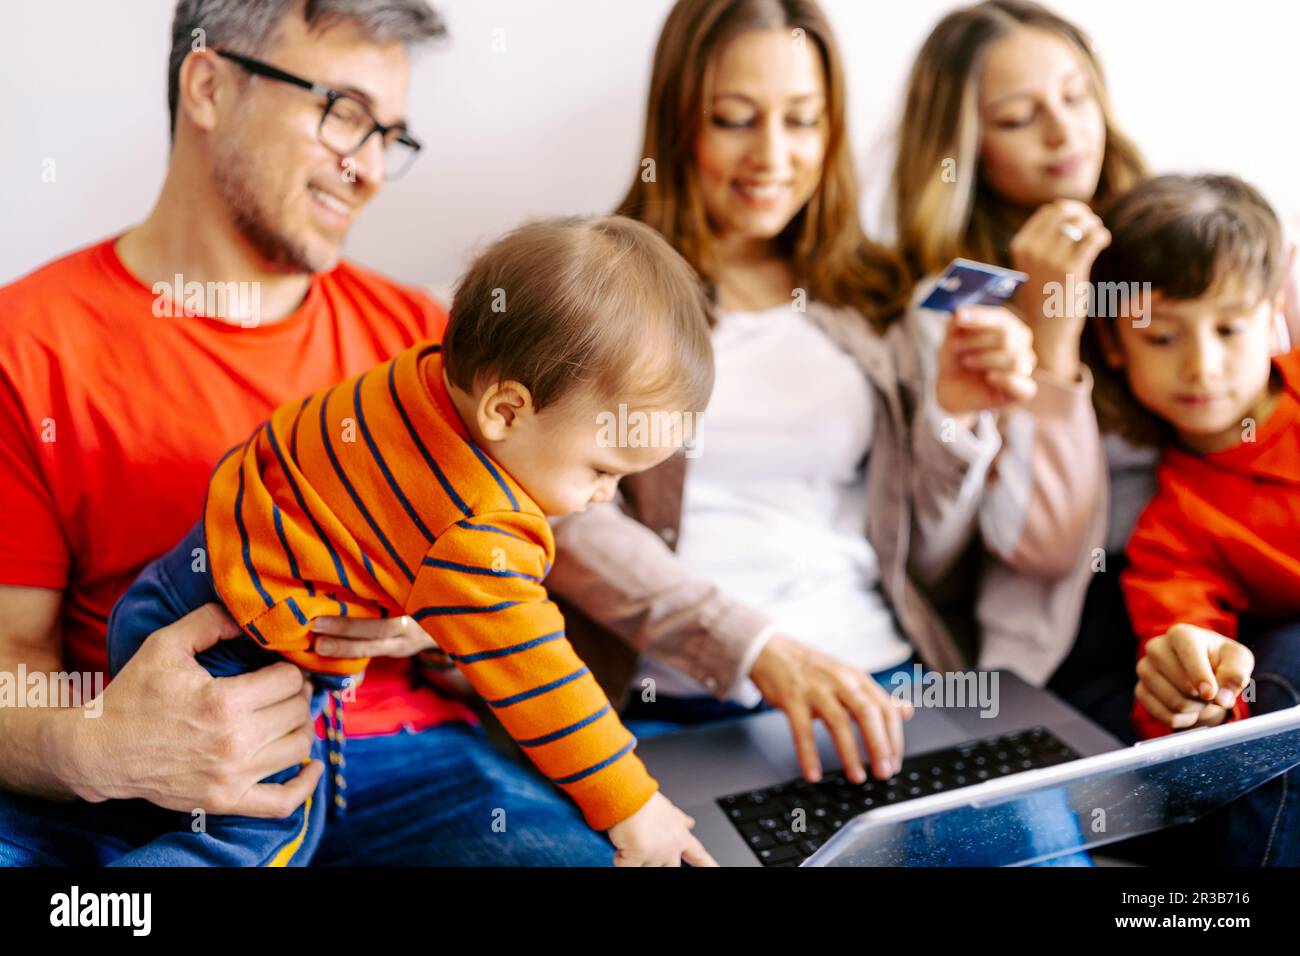 Family spending leisure time together with laptop at home Stock Photo